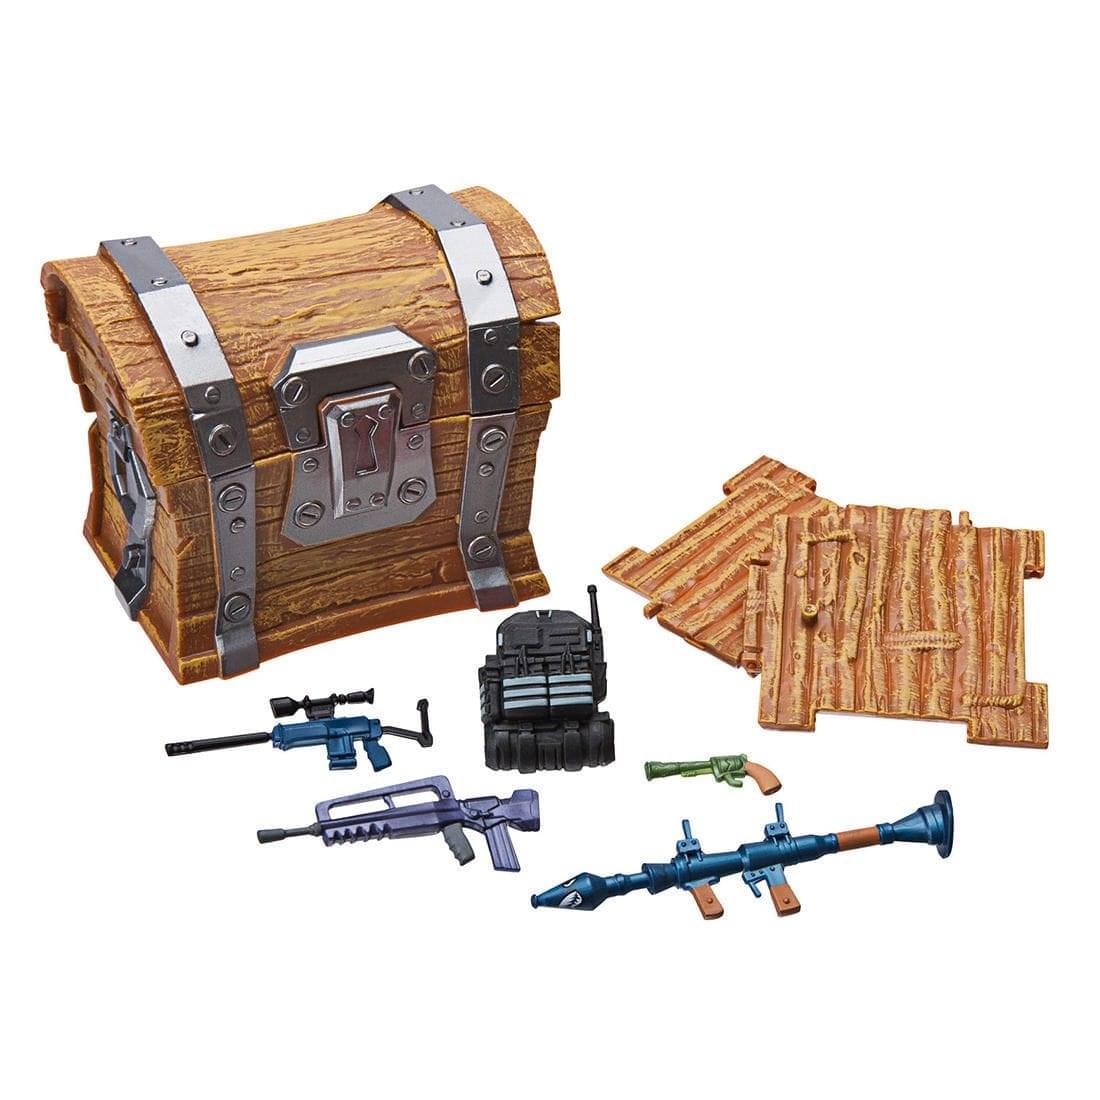 Fortnite Loot Chest For 4-Inch Figures - Standard Issue